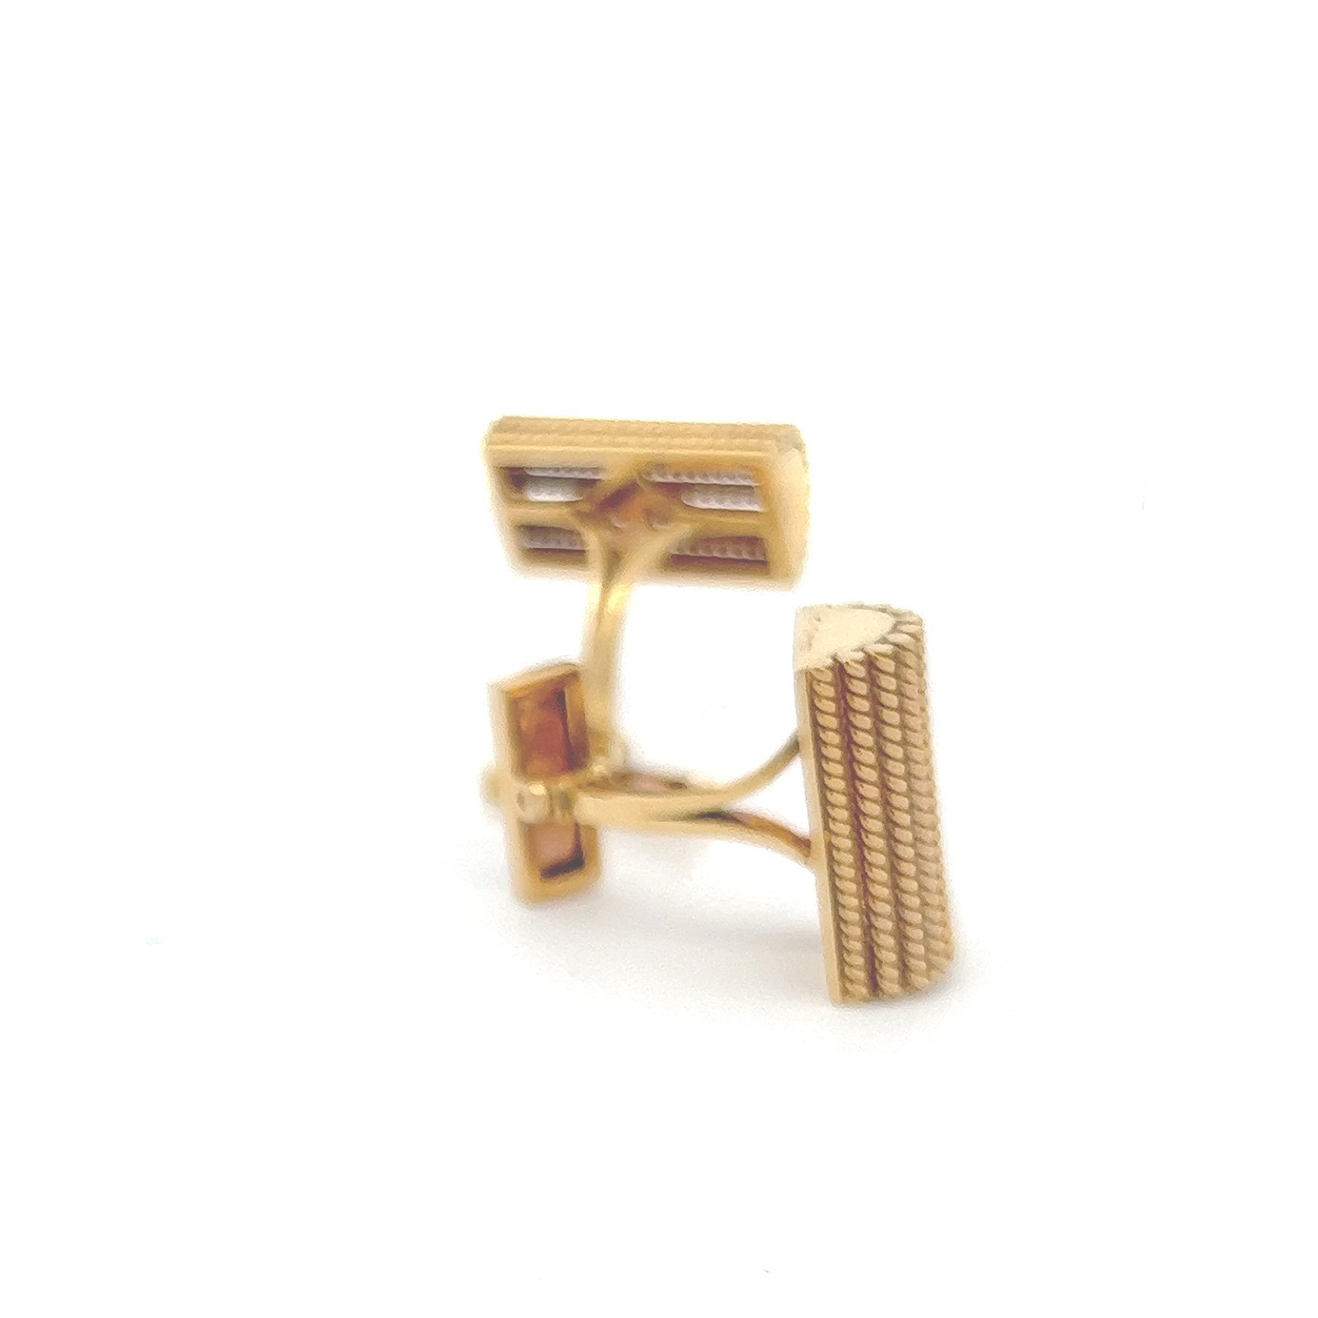 Cartier 1950s 18KT Yellow Gold Cufflinks side and back view